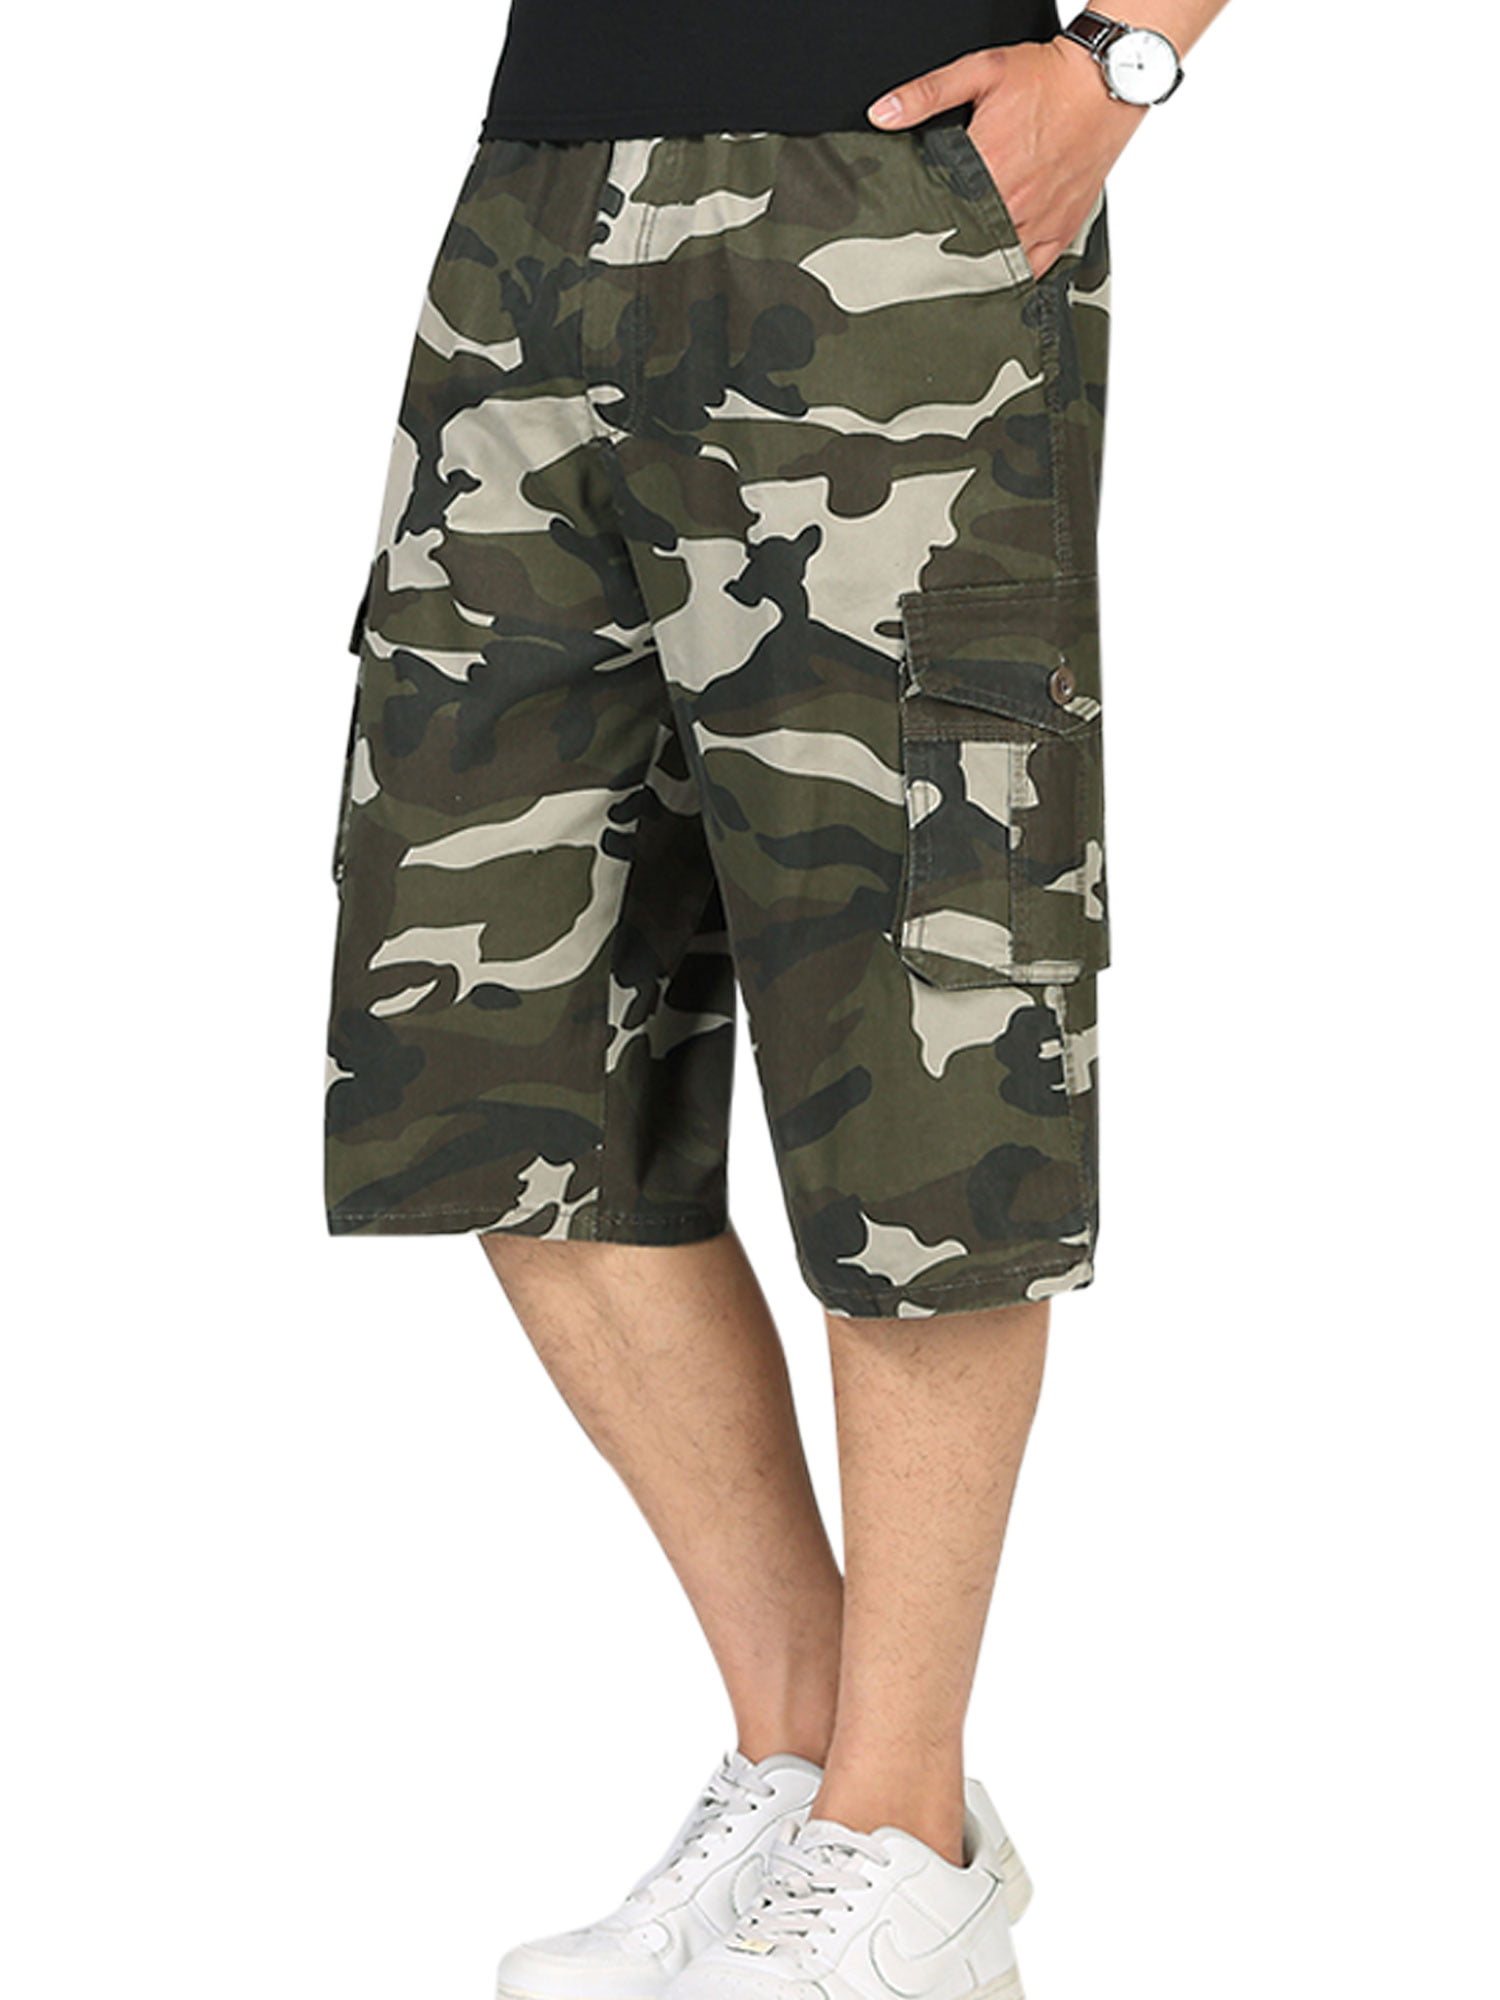 Mstyle Mens Casual Active Camo Print Elastic Waist Relaxed Fit Beach Shorts Boardshort Swim Trunk 